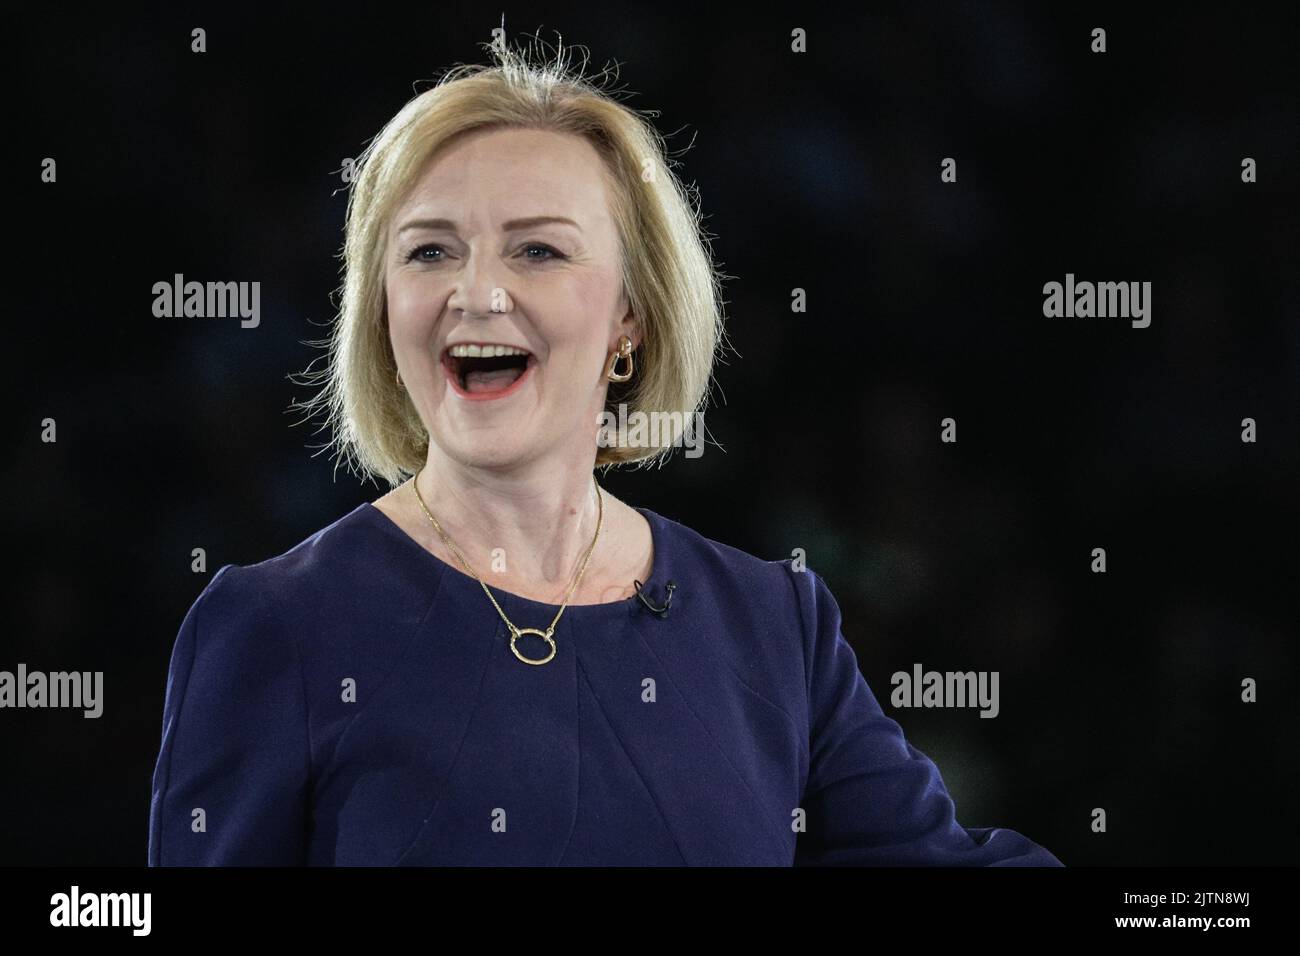 London, UK. 31st Aug, 2022. Liz Truss close up of face, smiling, looks confident. The final hustings in the Conservative Party leadership race, held at Wembley Arena, sees Liz Truss and Rishi Sunak compete to lead the party and become the next Prime Minister. Credit: Imageplotter/Alamy Live News Stock Photo